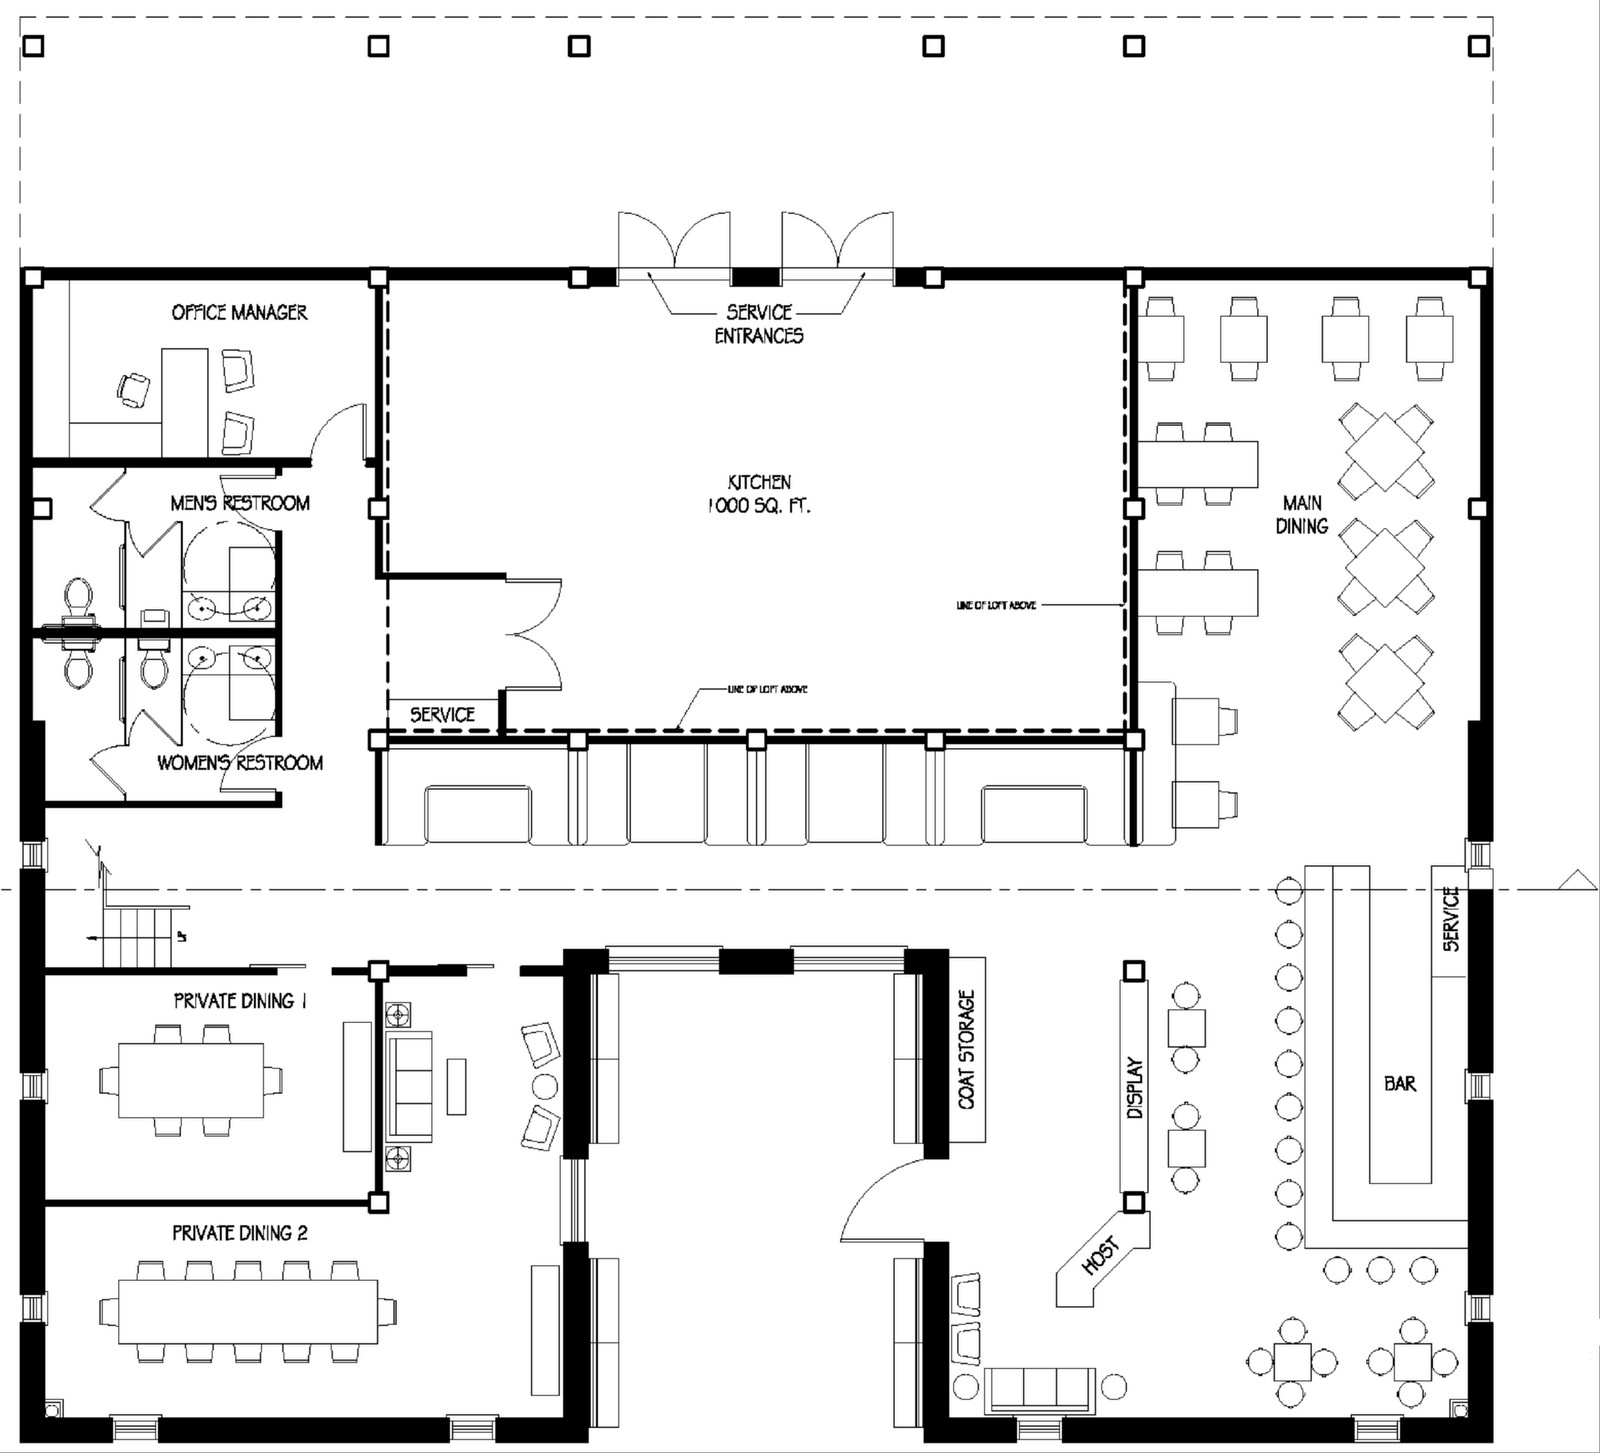 20 Gorgeous Restaurant Kitchen Floor Plan - Home, Family, Style and Art ...